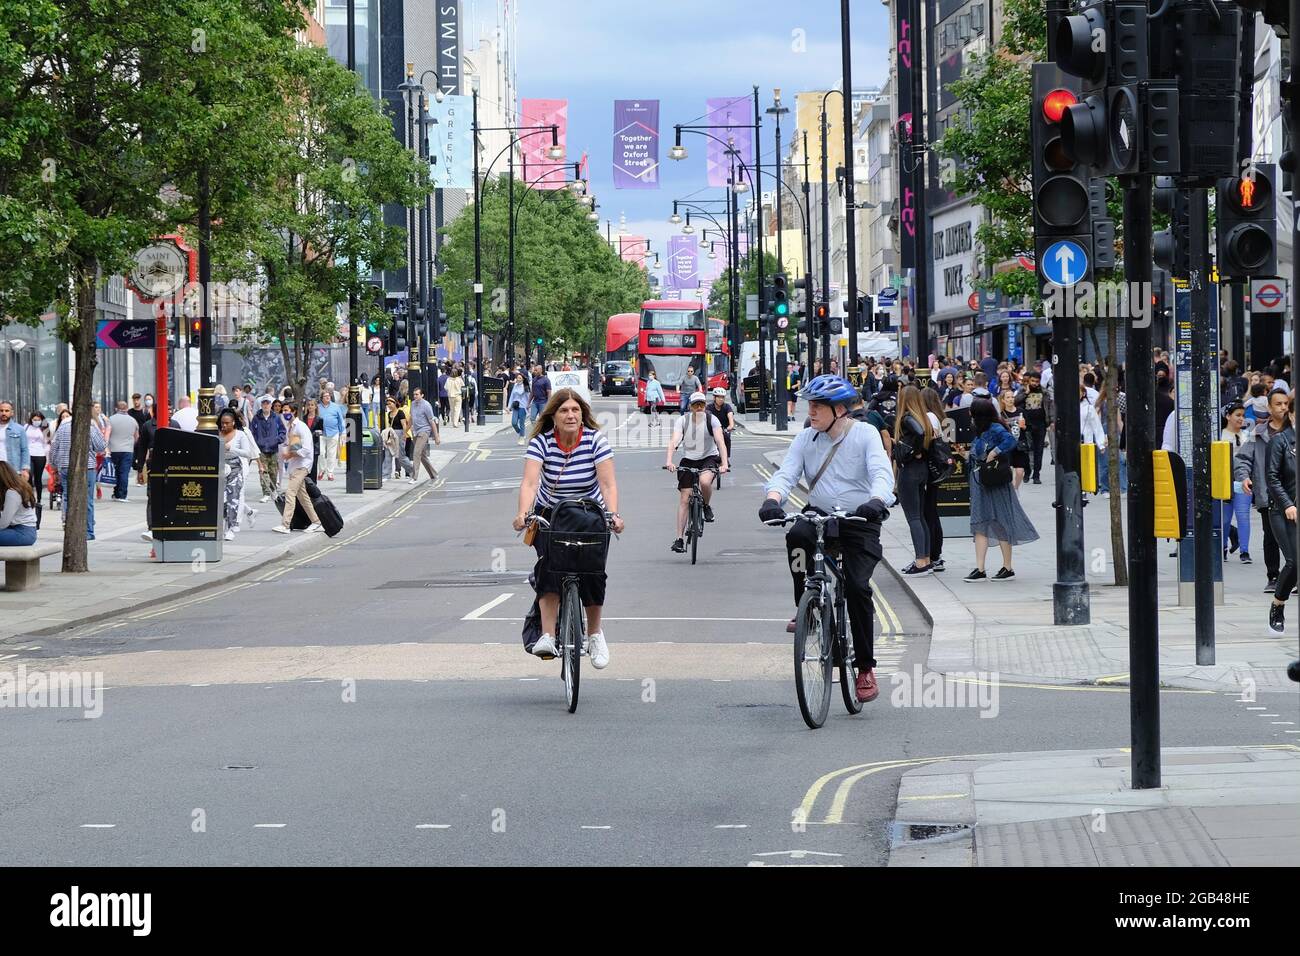 Cyclists ride along London's Oxford Street which is largely traffic free aside from major bus routes operating through the area. Stock Photo